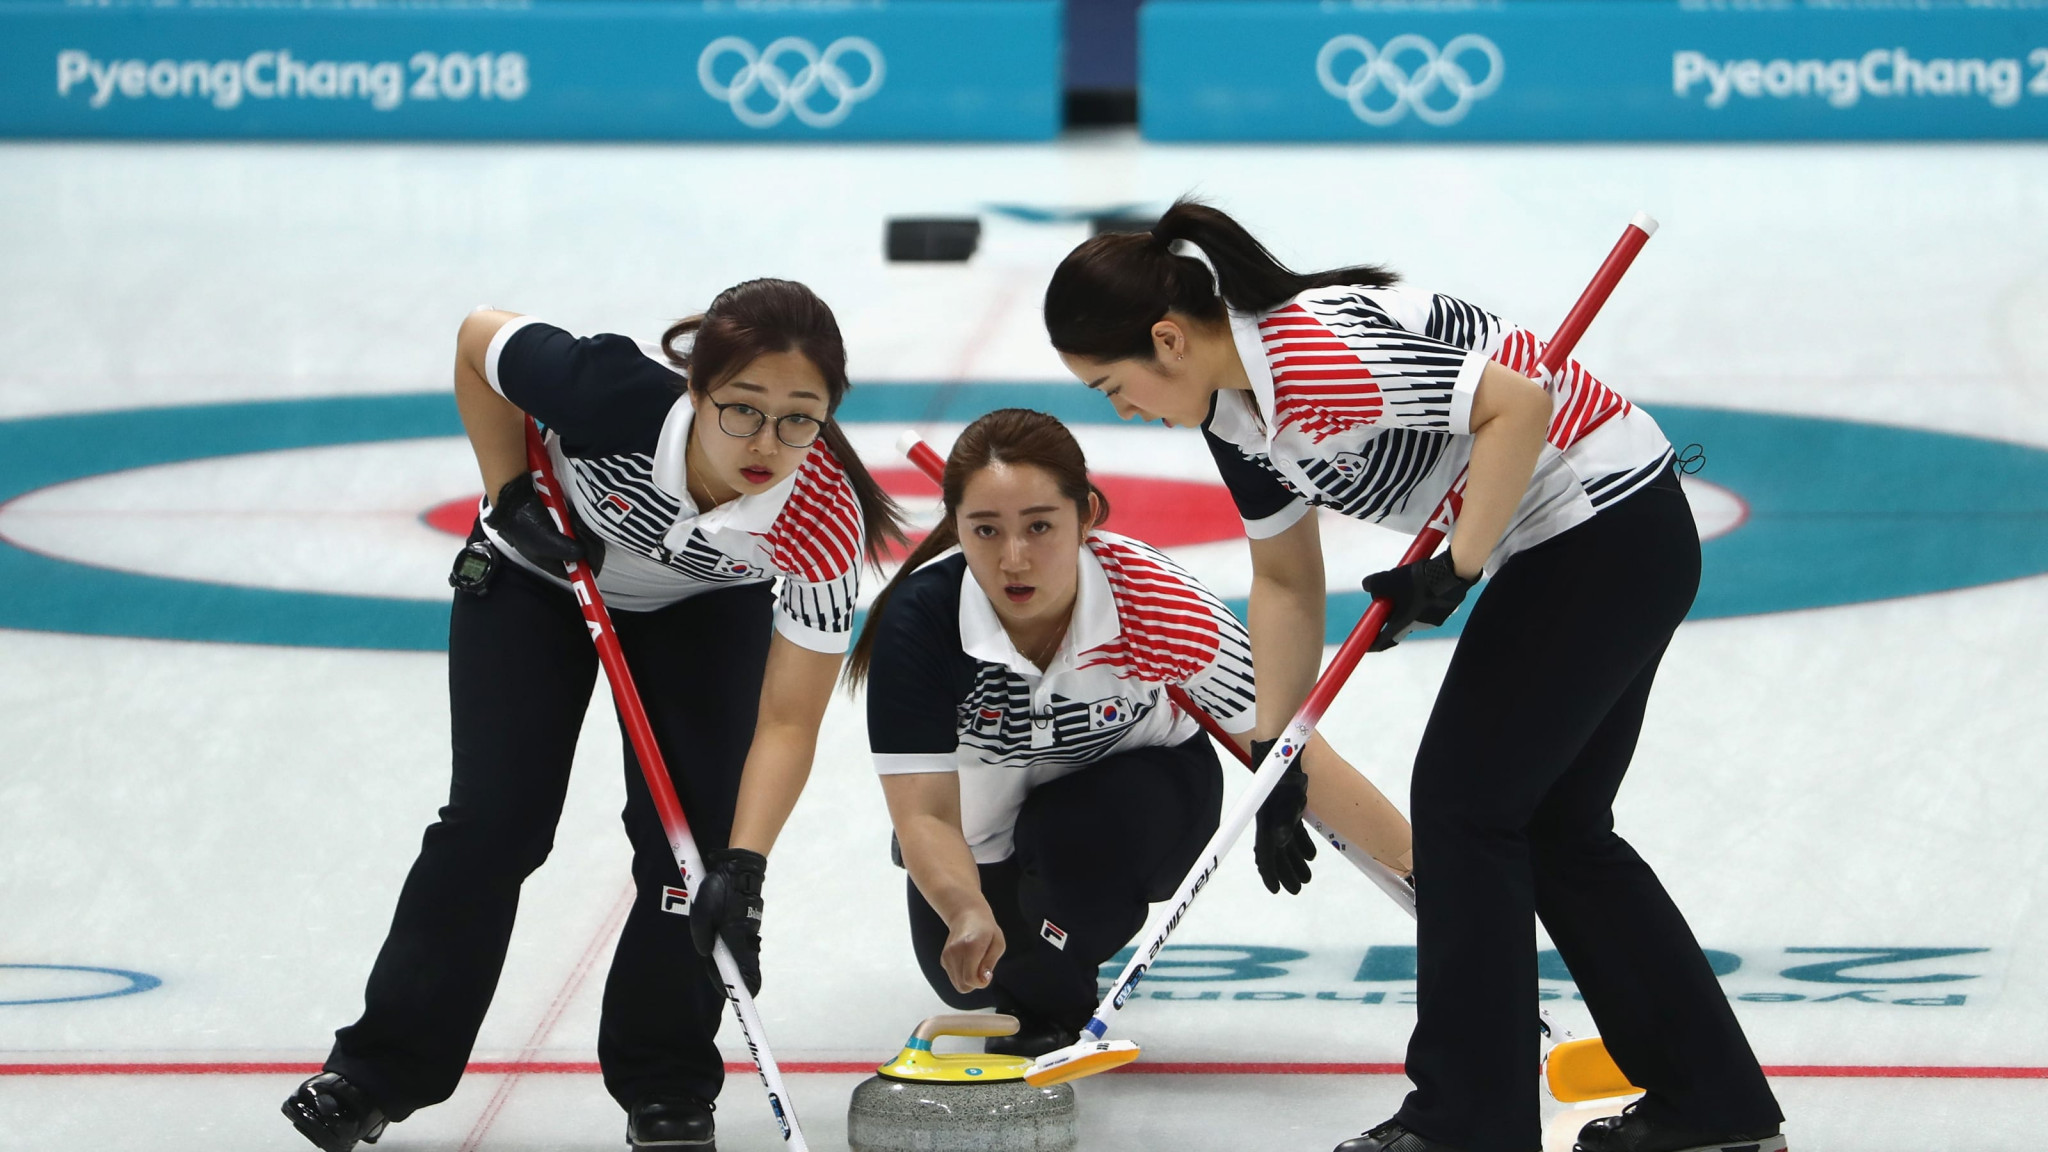 South Korea will be hoping its women's curling team can repeat its heroics of Pyeongchang 2018, where they won a surprise silver medal, at Beijing 2022 ©Getty Images